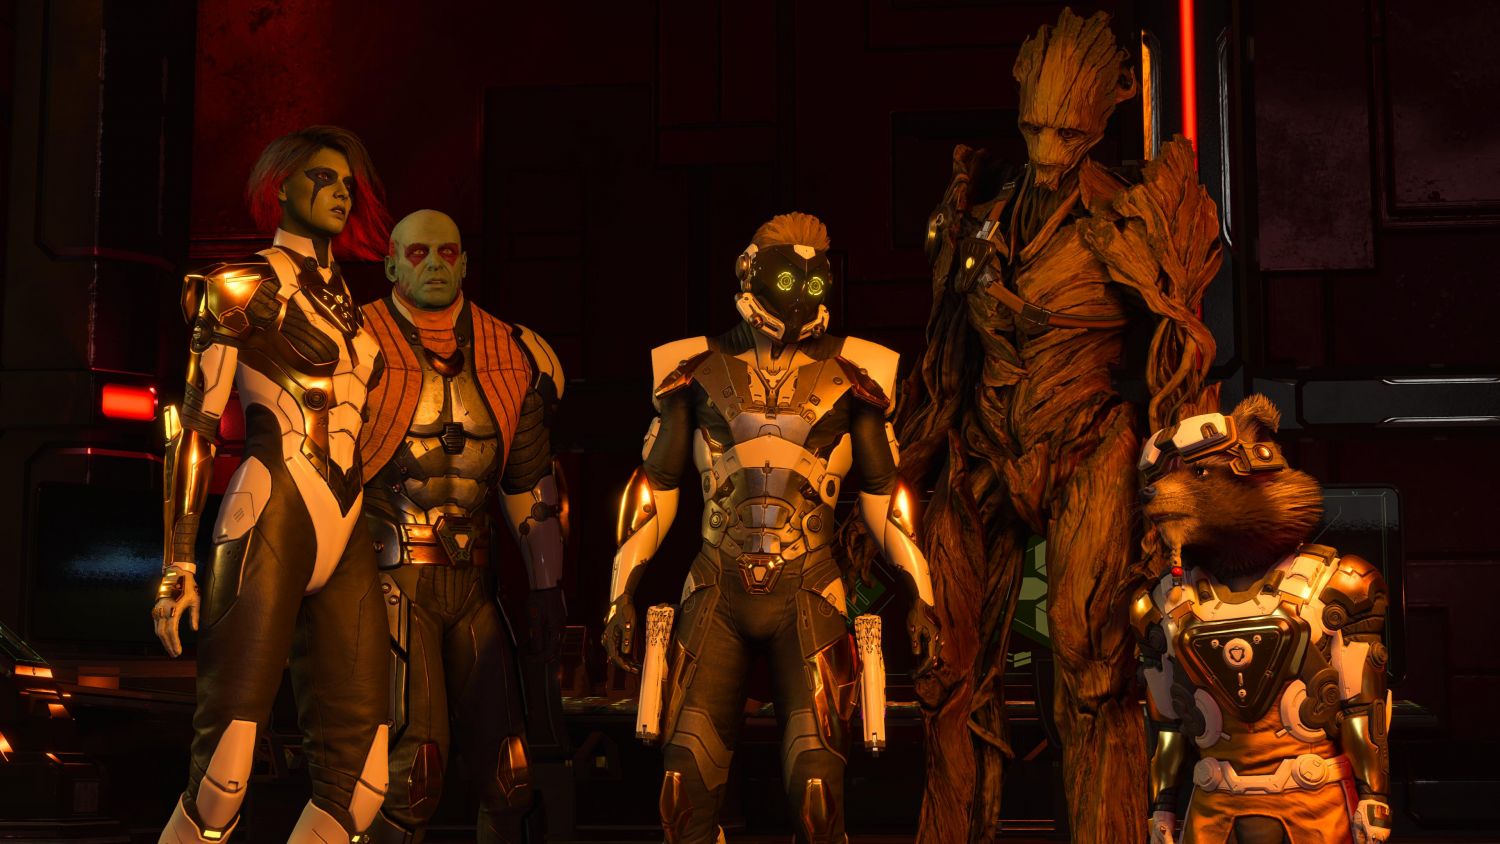 Geek Review: Marvel's Guardians of the Galaxy - The team